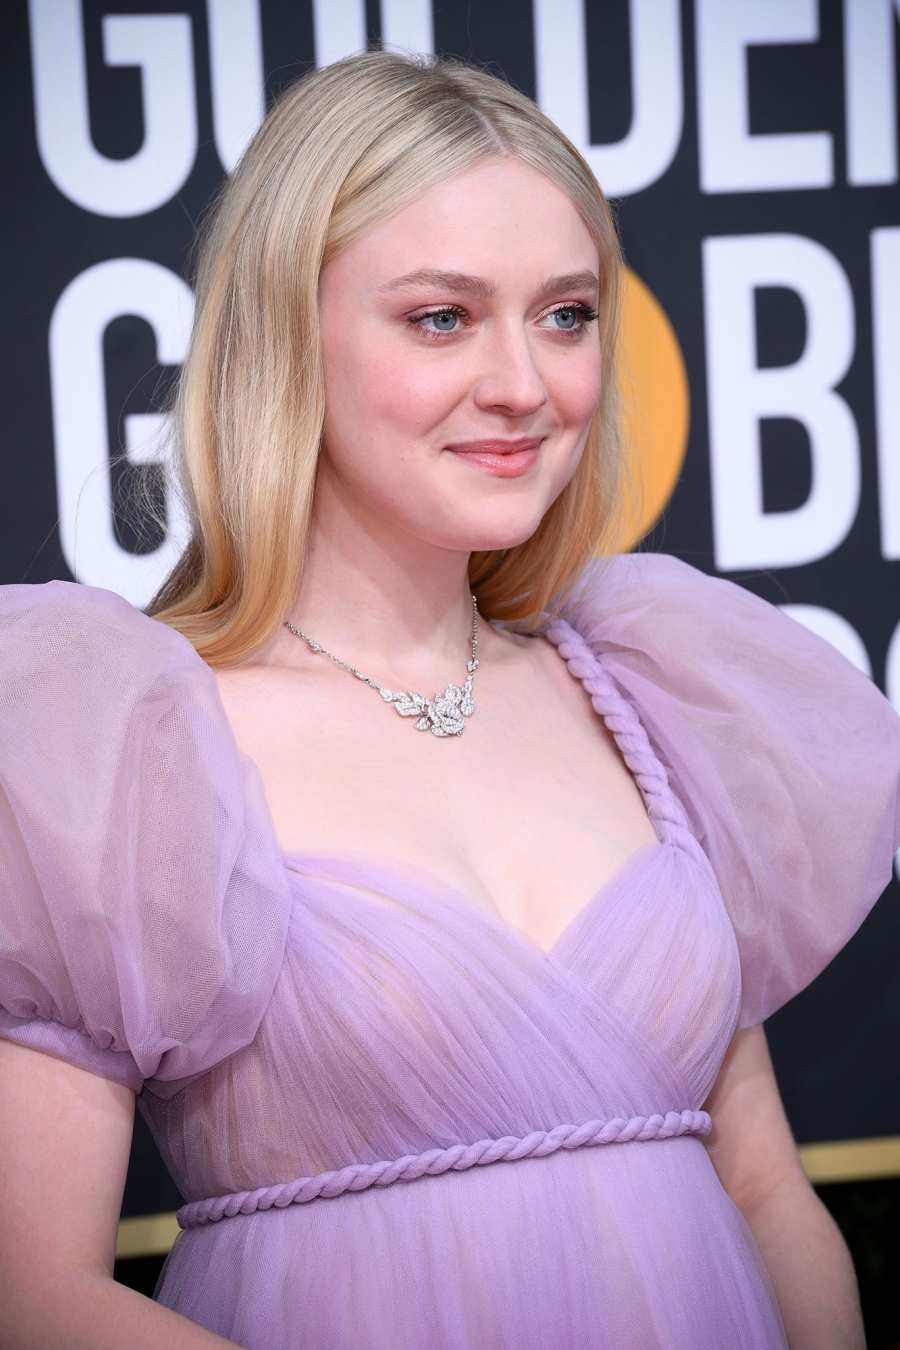 Dakota Fanning What You Didn't See on TV Golden Globes 2020